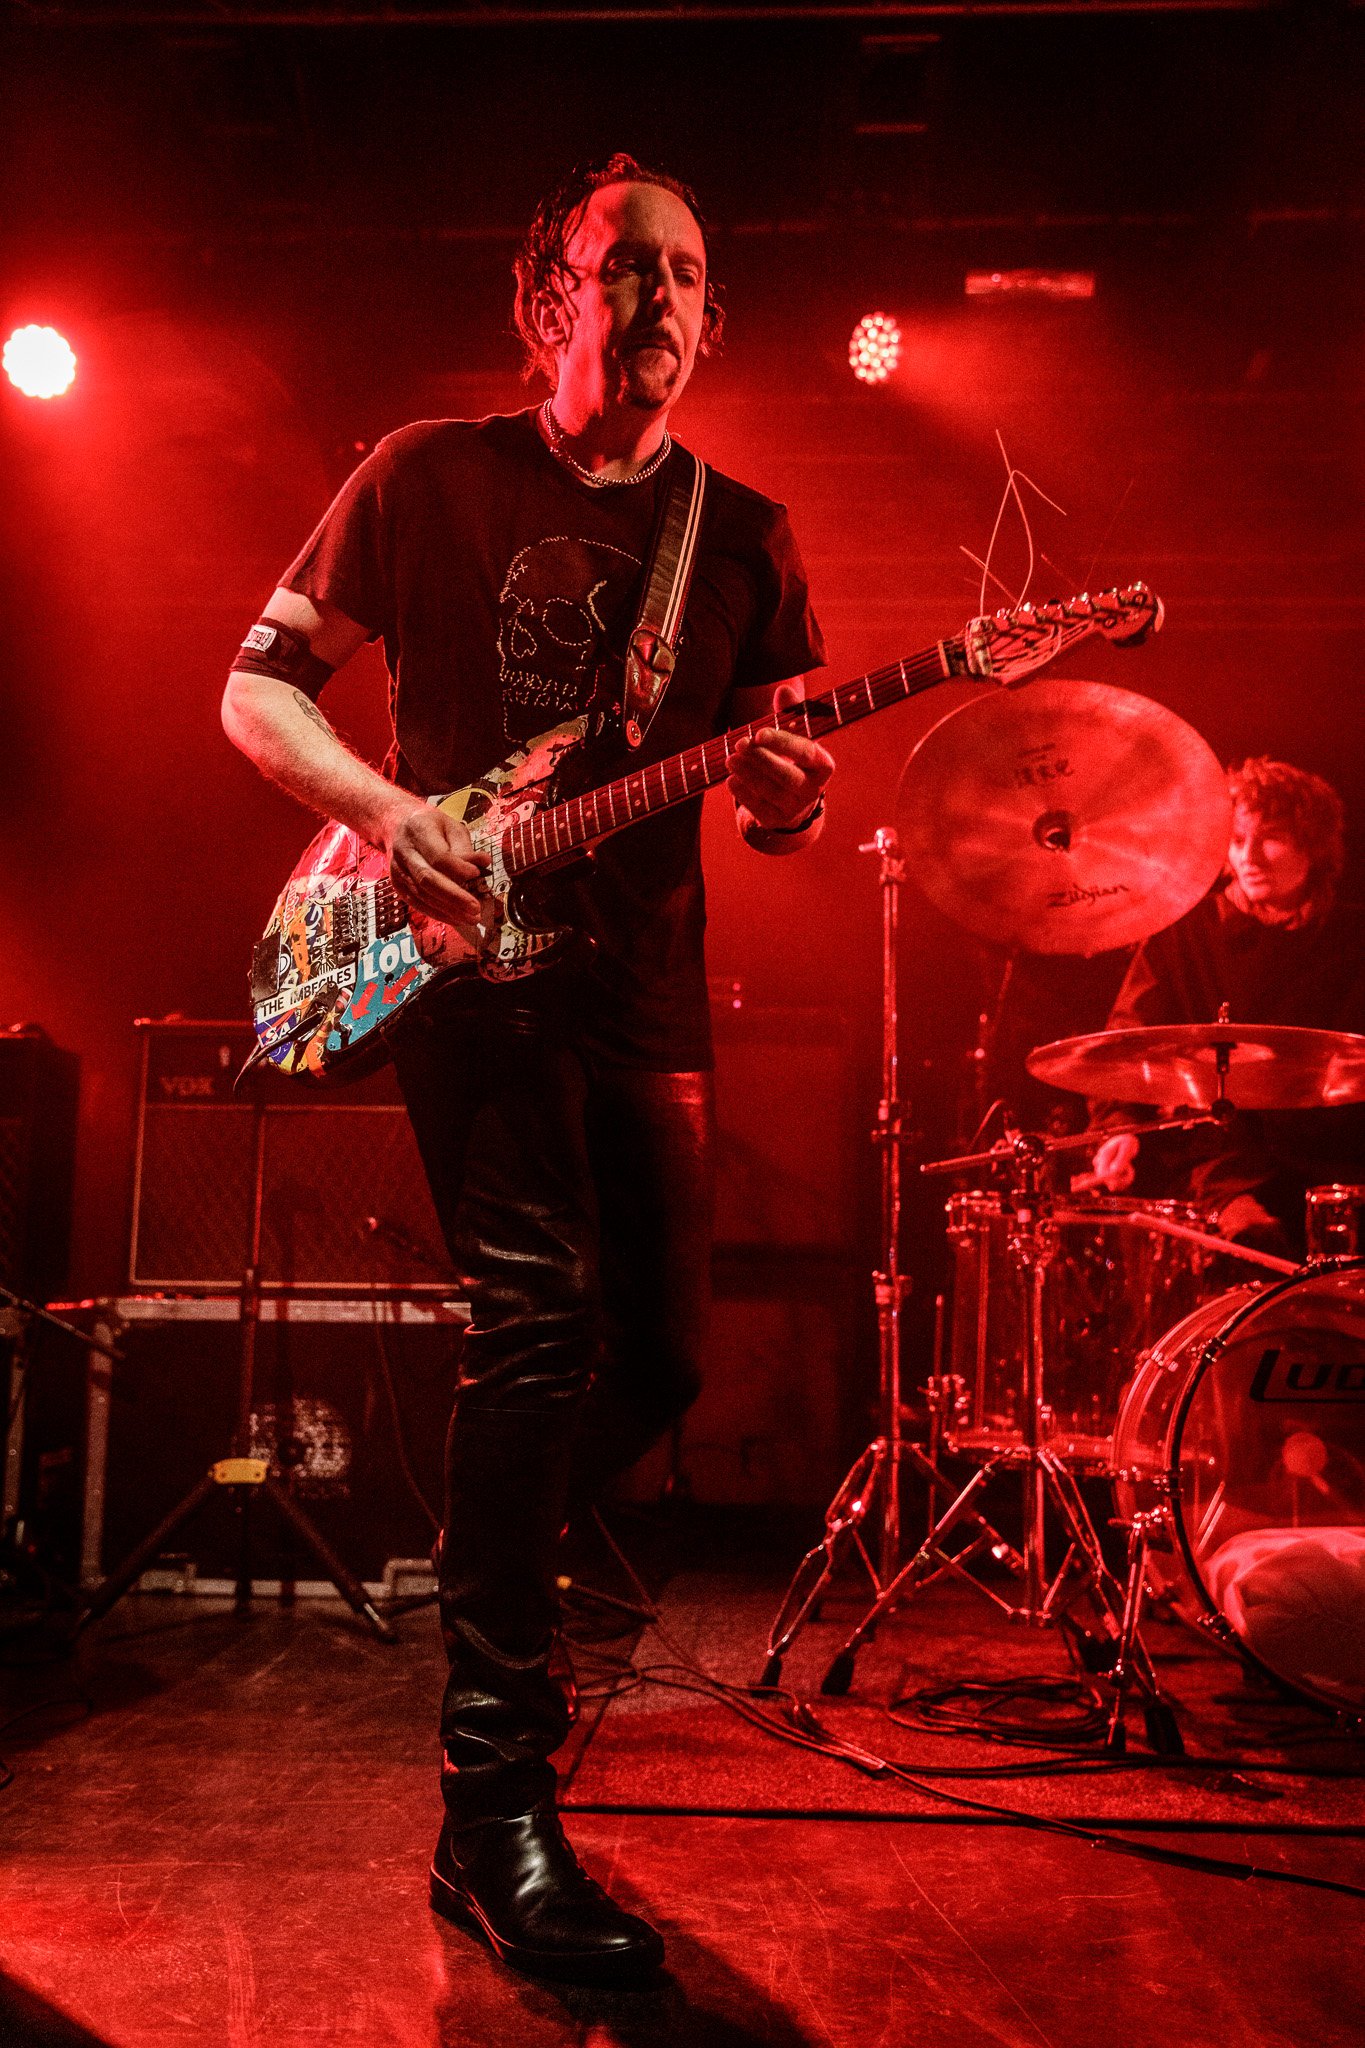  The Imbeciles at the O2 Academy in Liverpool on April 1st 2022 ©Johann Wierzbicki 